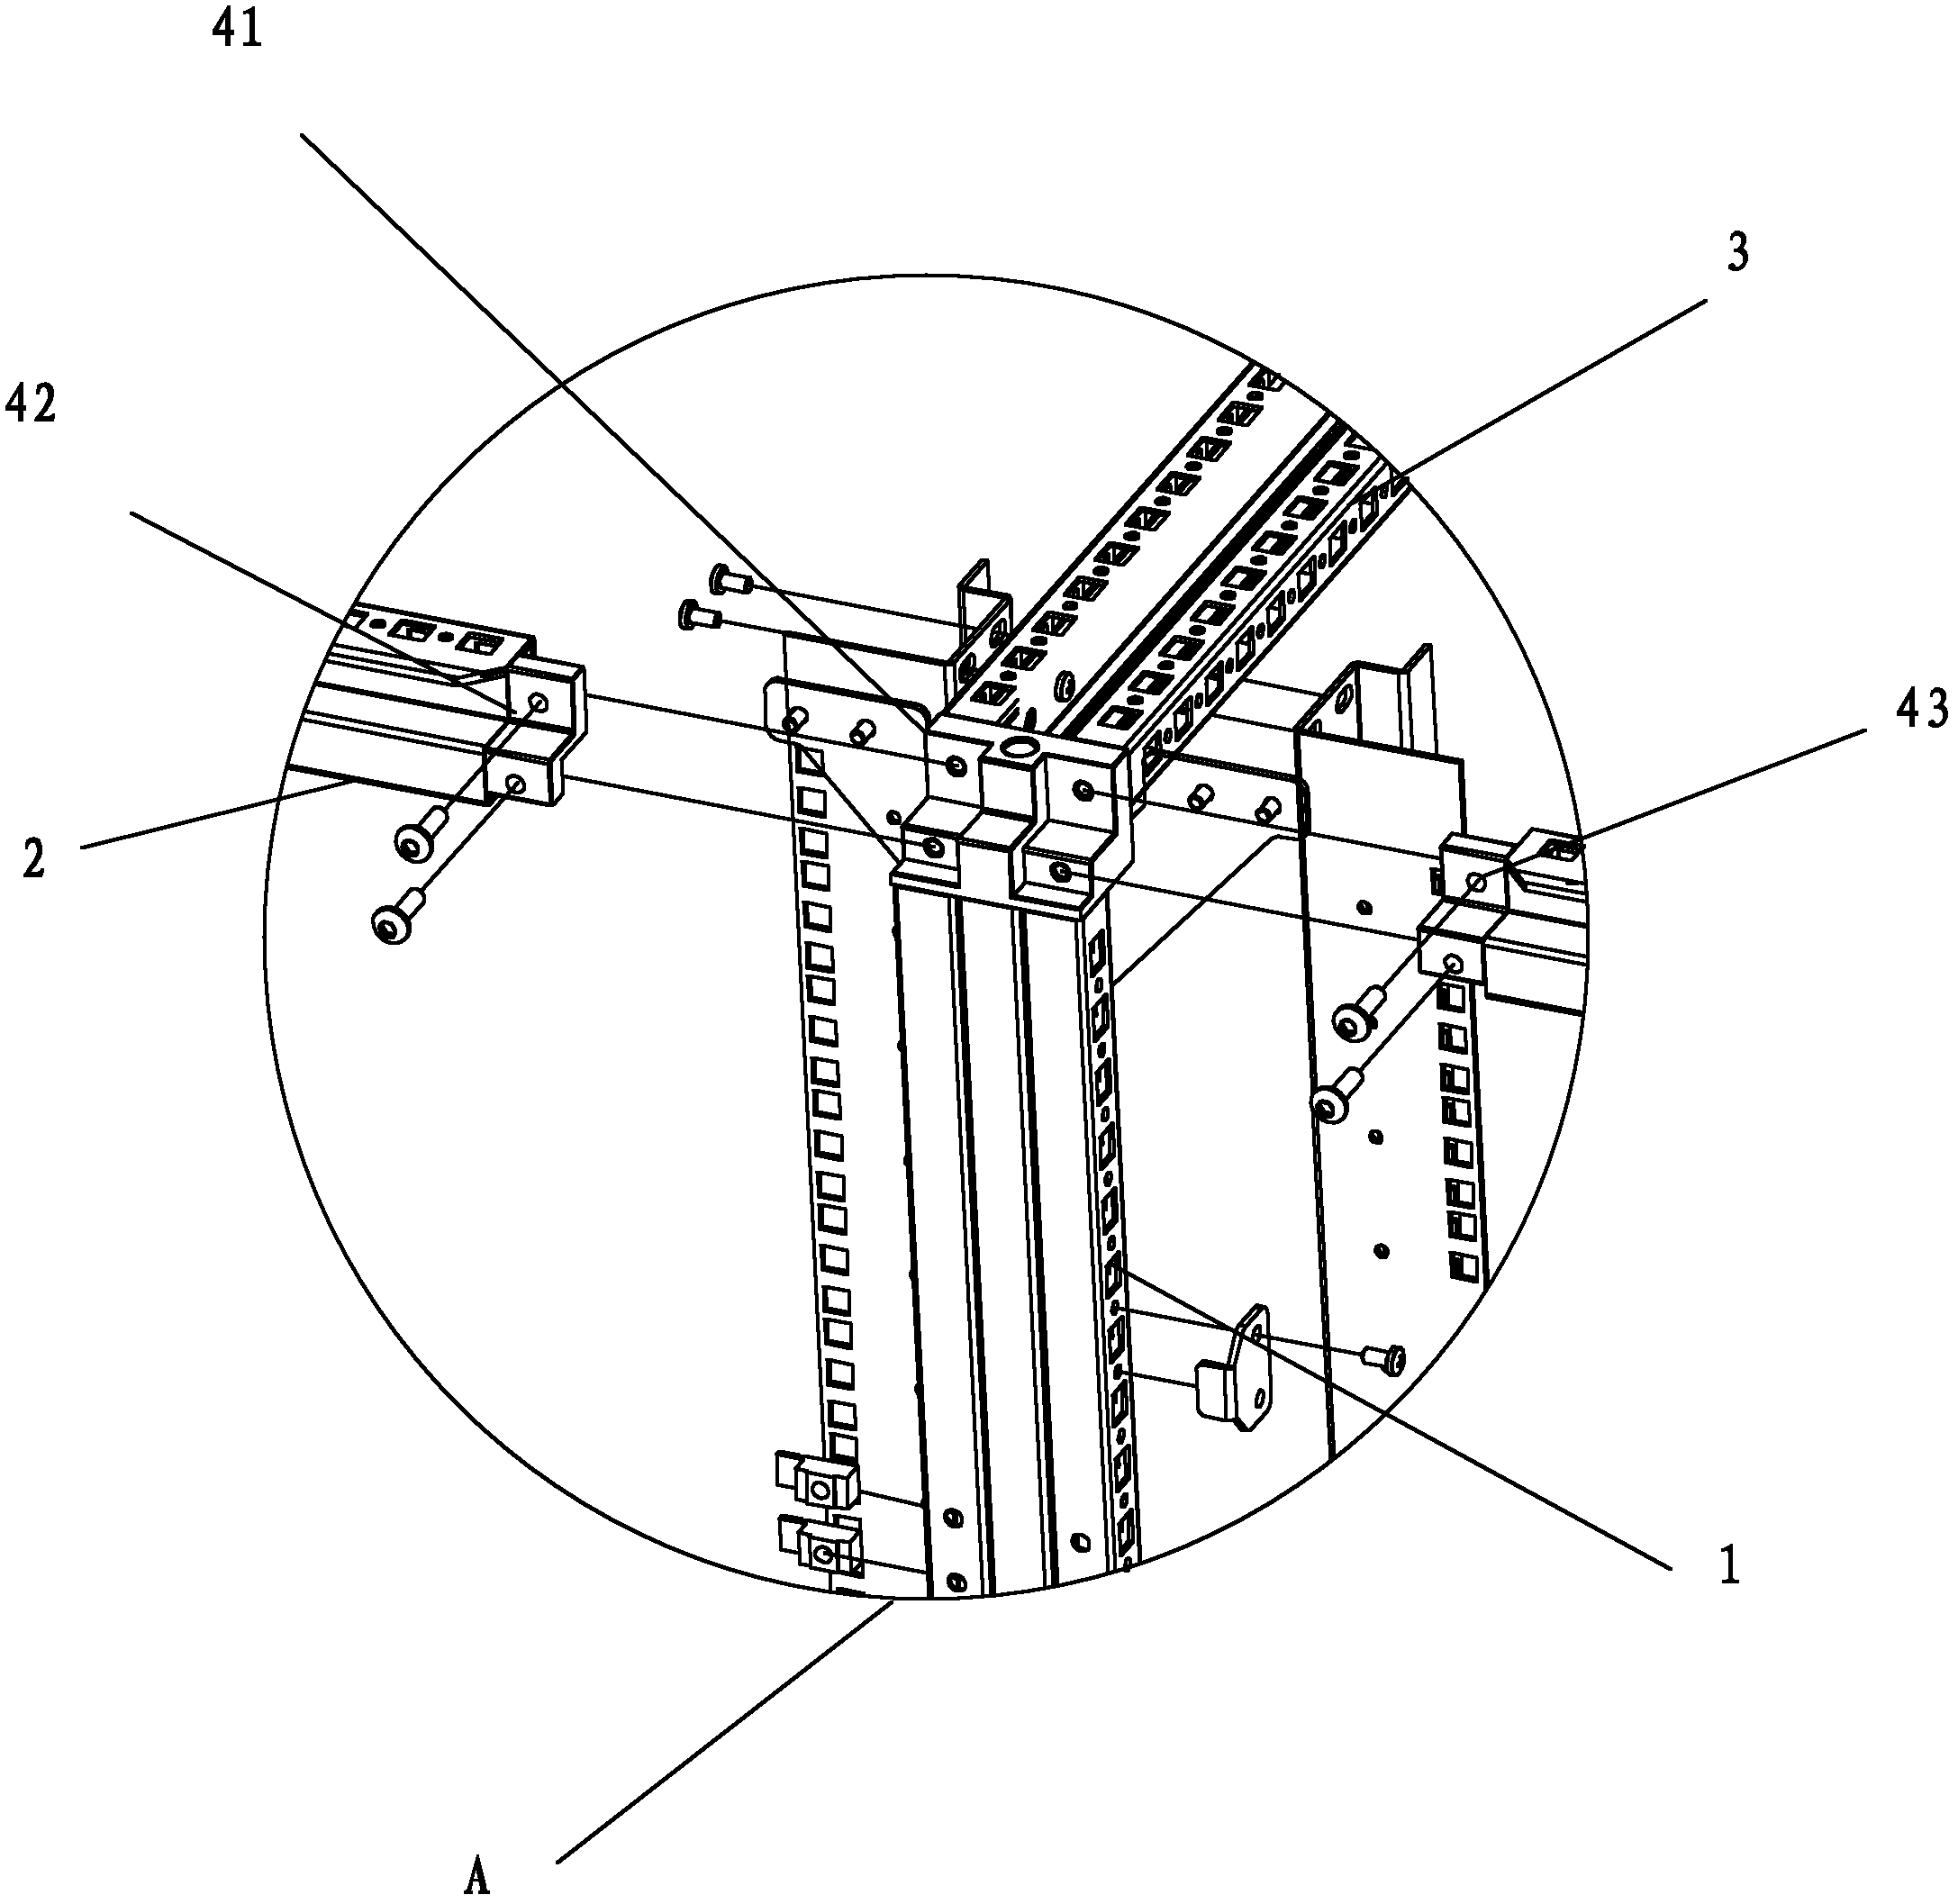 Combined and parallelly-mounted cabinet